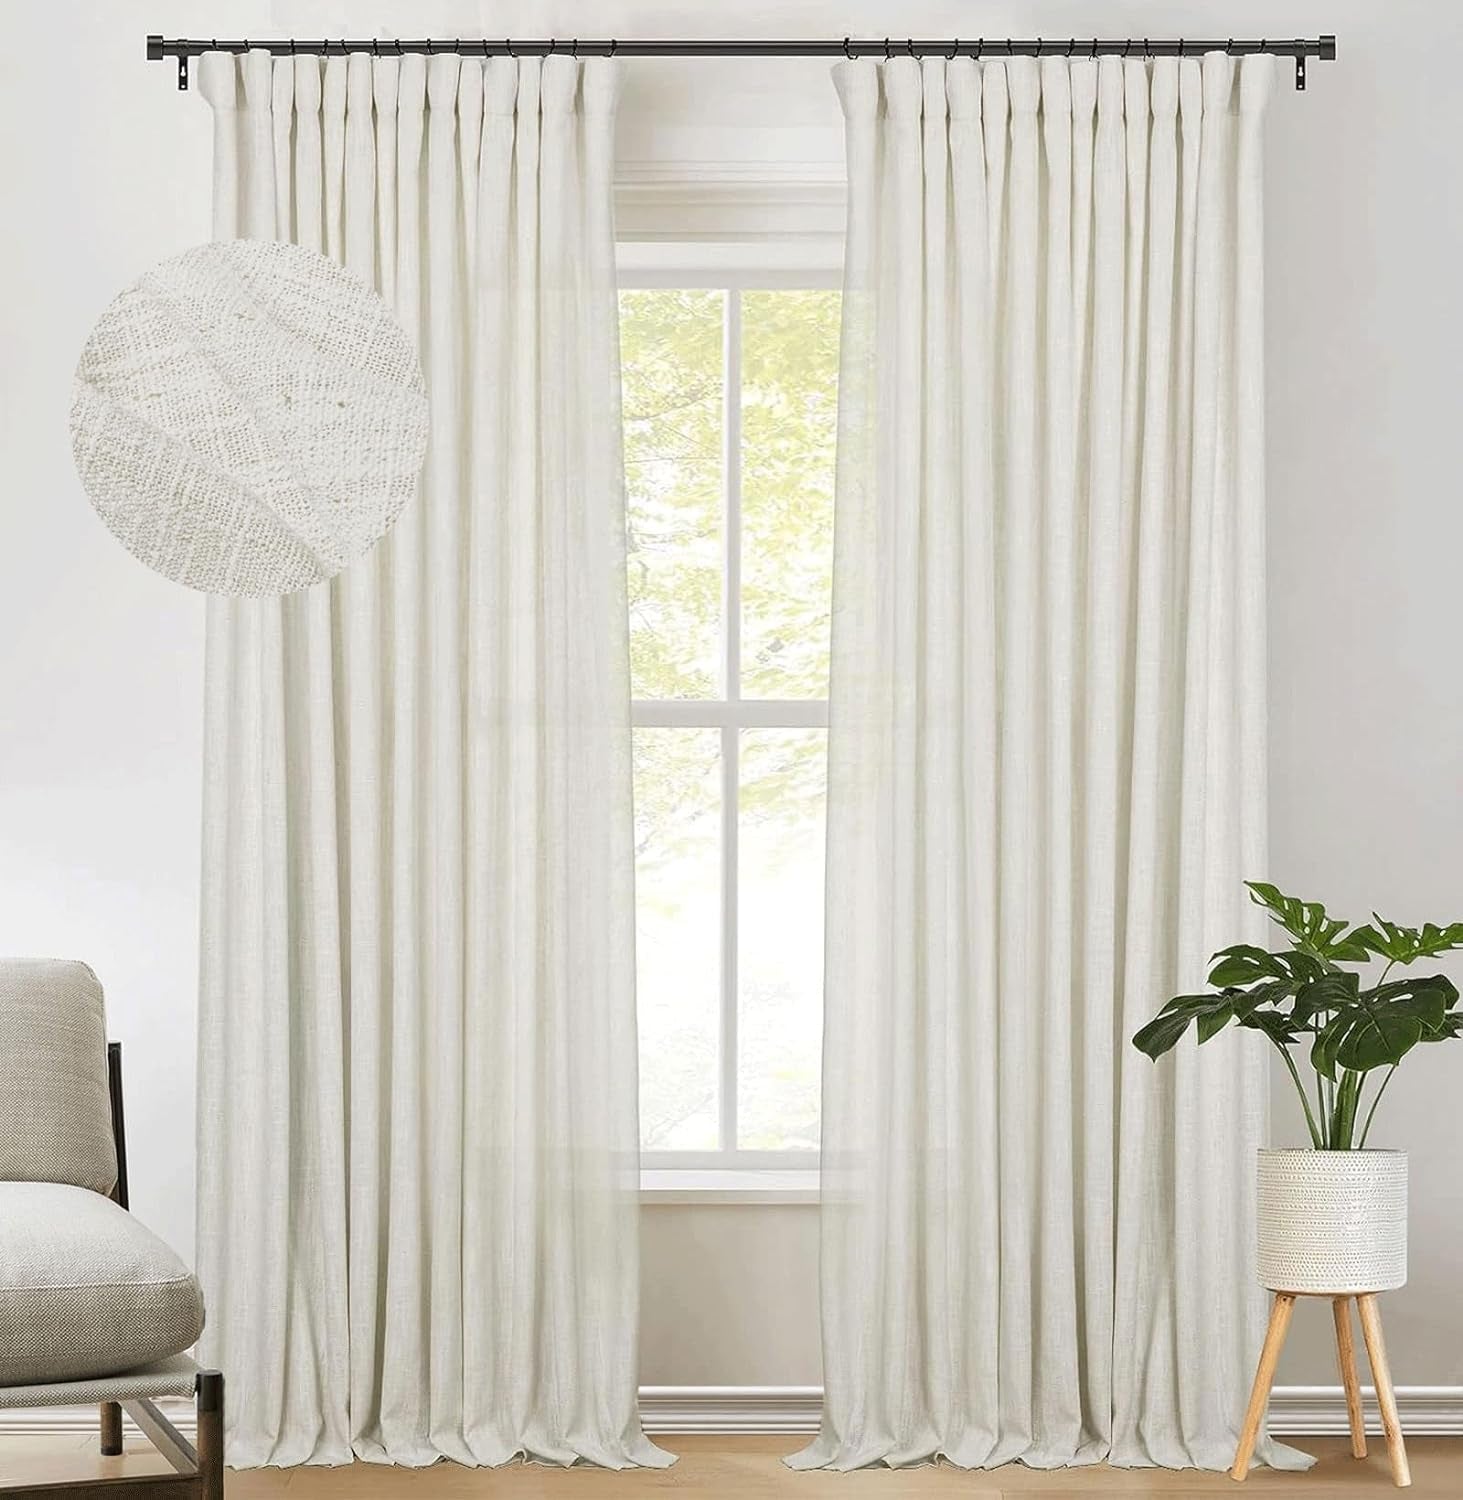 Zeerobee Beige White Linen Curtains for Living Room/Bedroom Linen Curtains 96 Inches Long 2 Panels Linen Drapes Farmhouse Pinch Pleated Curtains Light Filtering Privacy Curtains, W50 X L96  zeerobee 04 Ivory 50"W X 84"L 